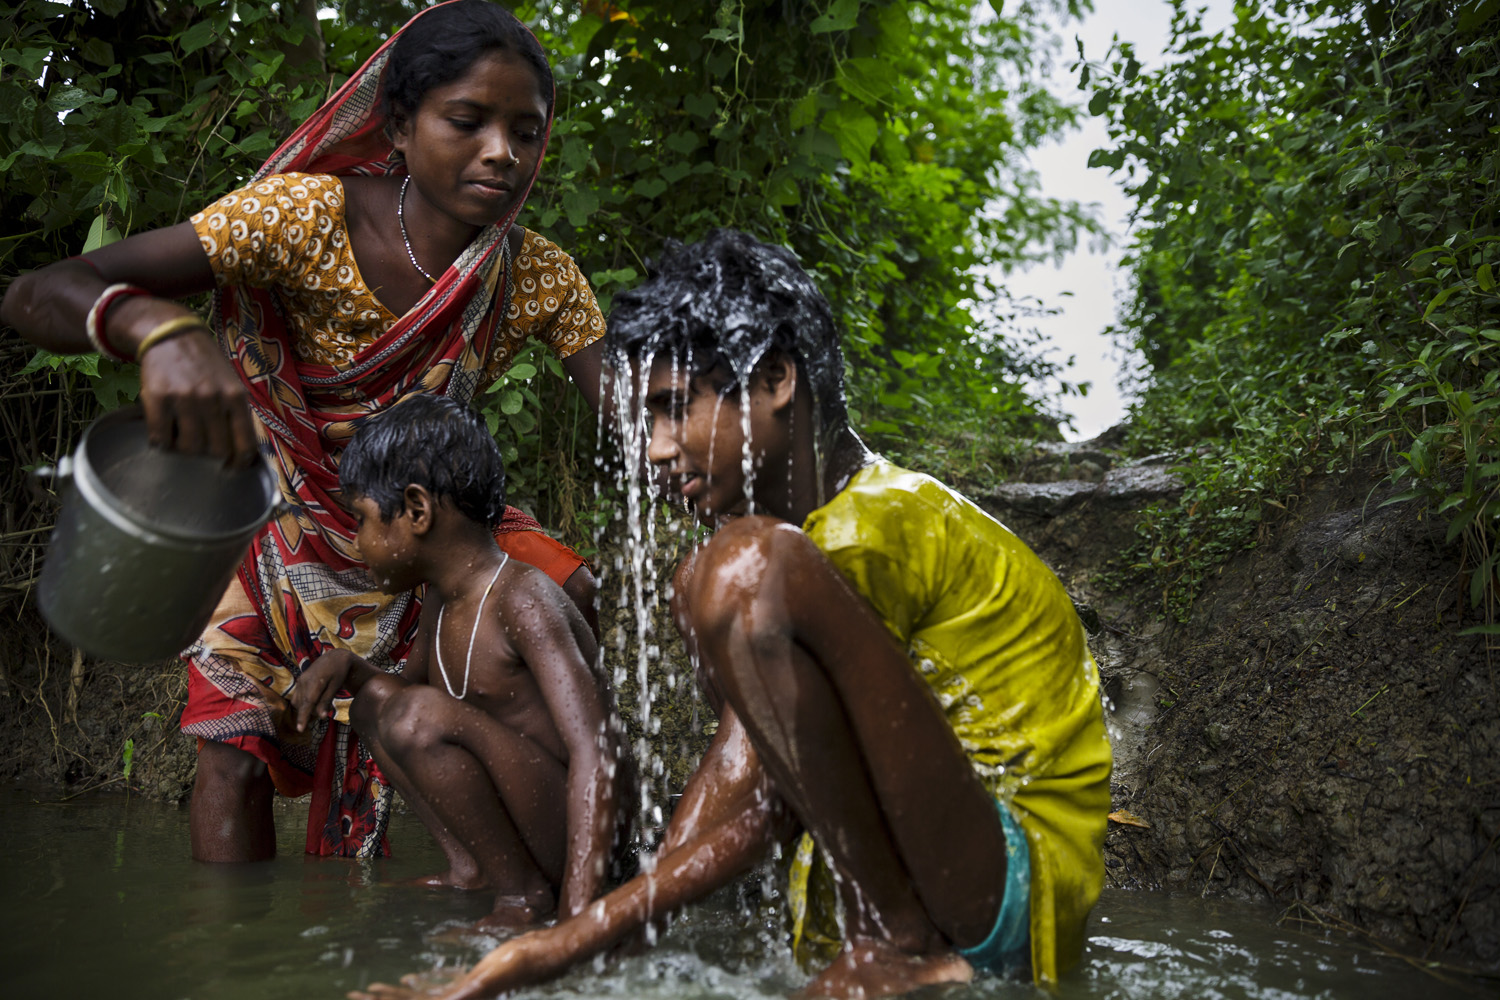 Sonia Singh is bathed by her mother while sister Anita waits her turn, Oct. 21, 2013 in West Bengal, India.